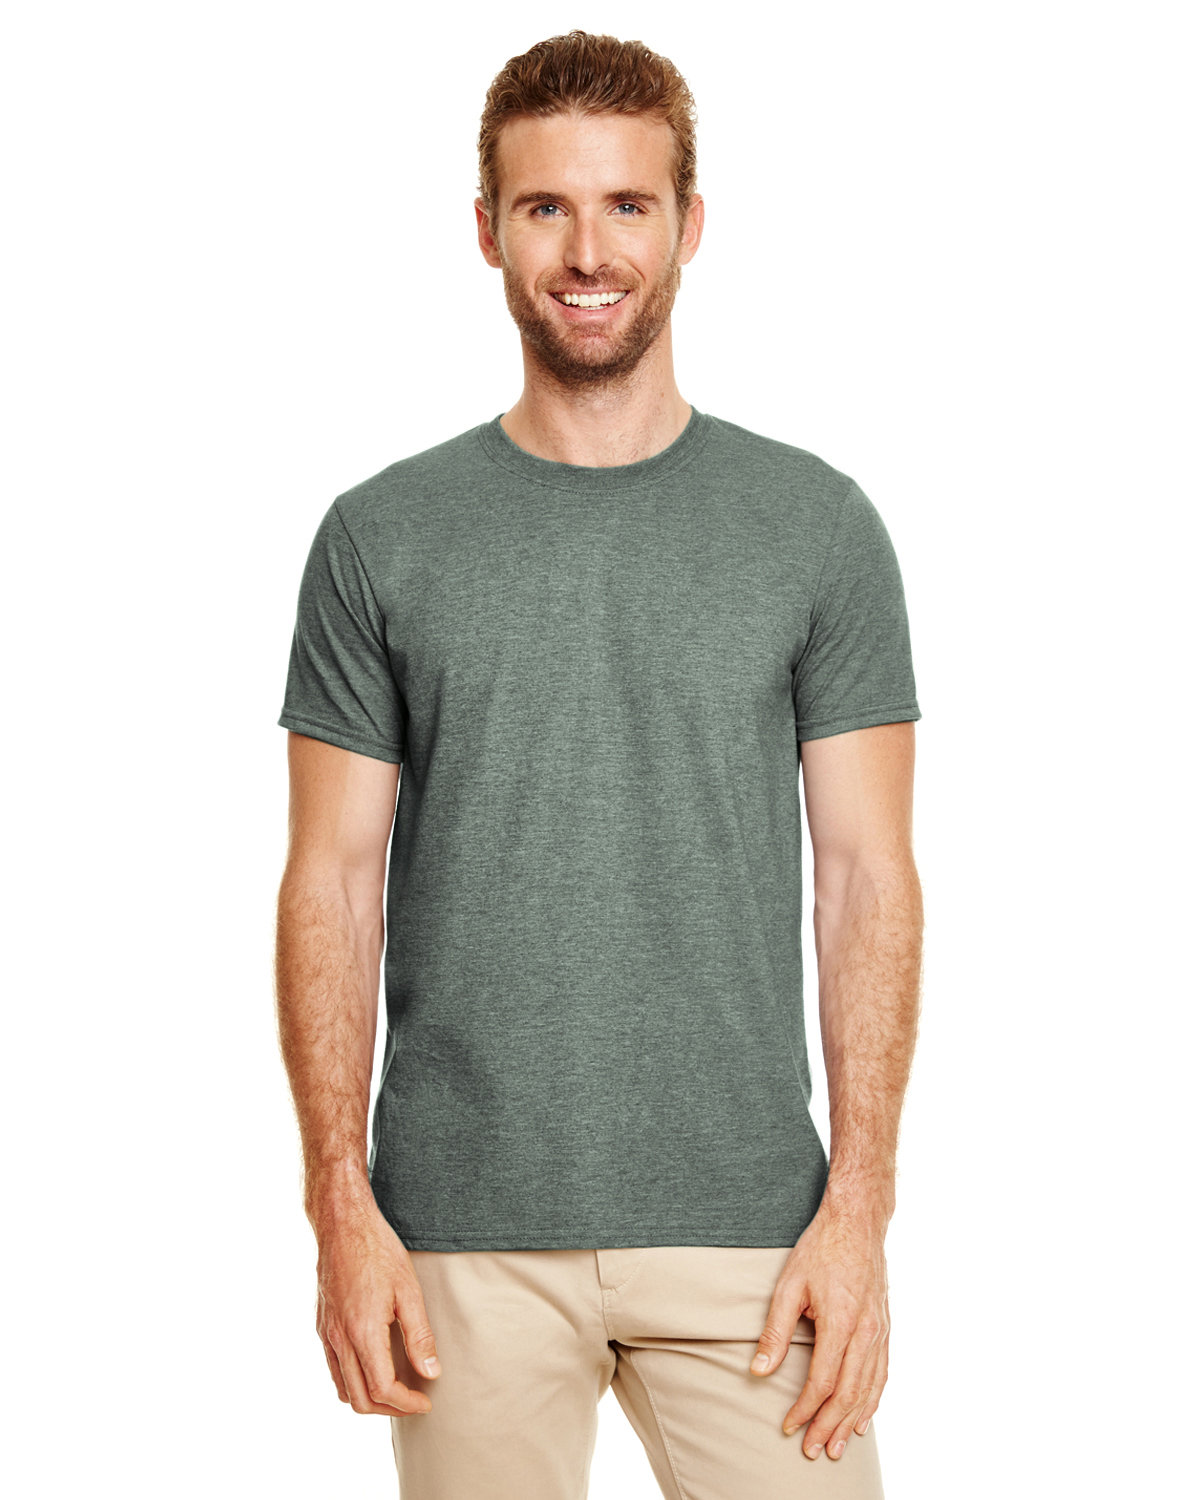 Gildan Adult Softstyle® T-Shirt HTH FOREST GREEN 